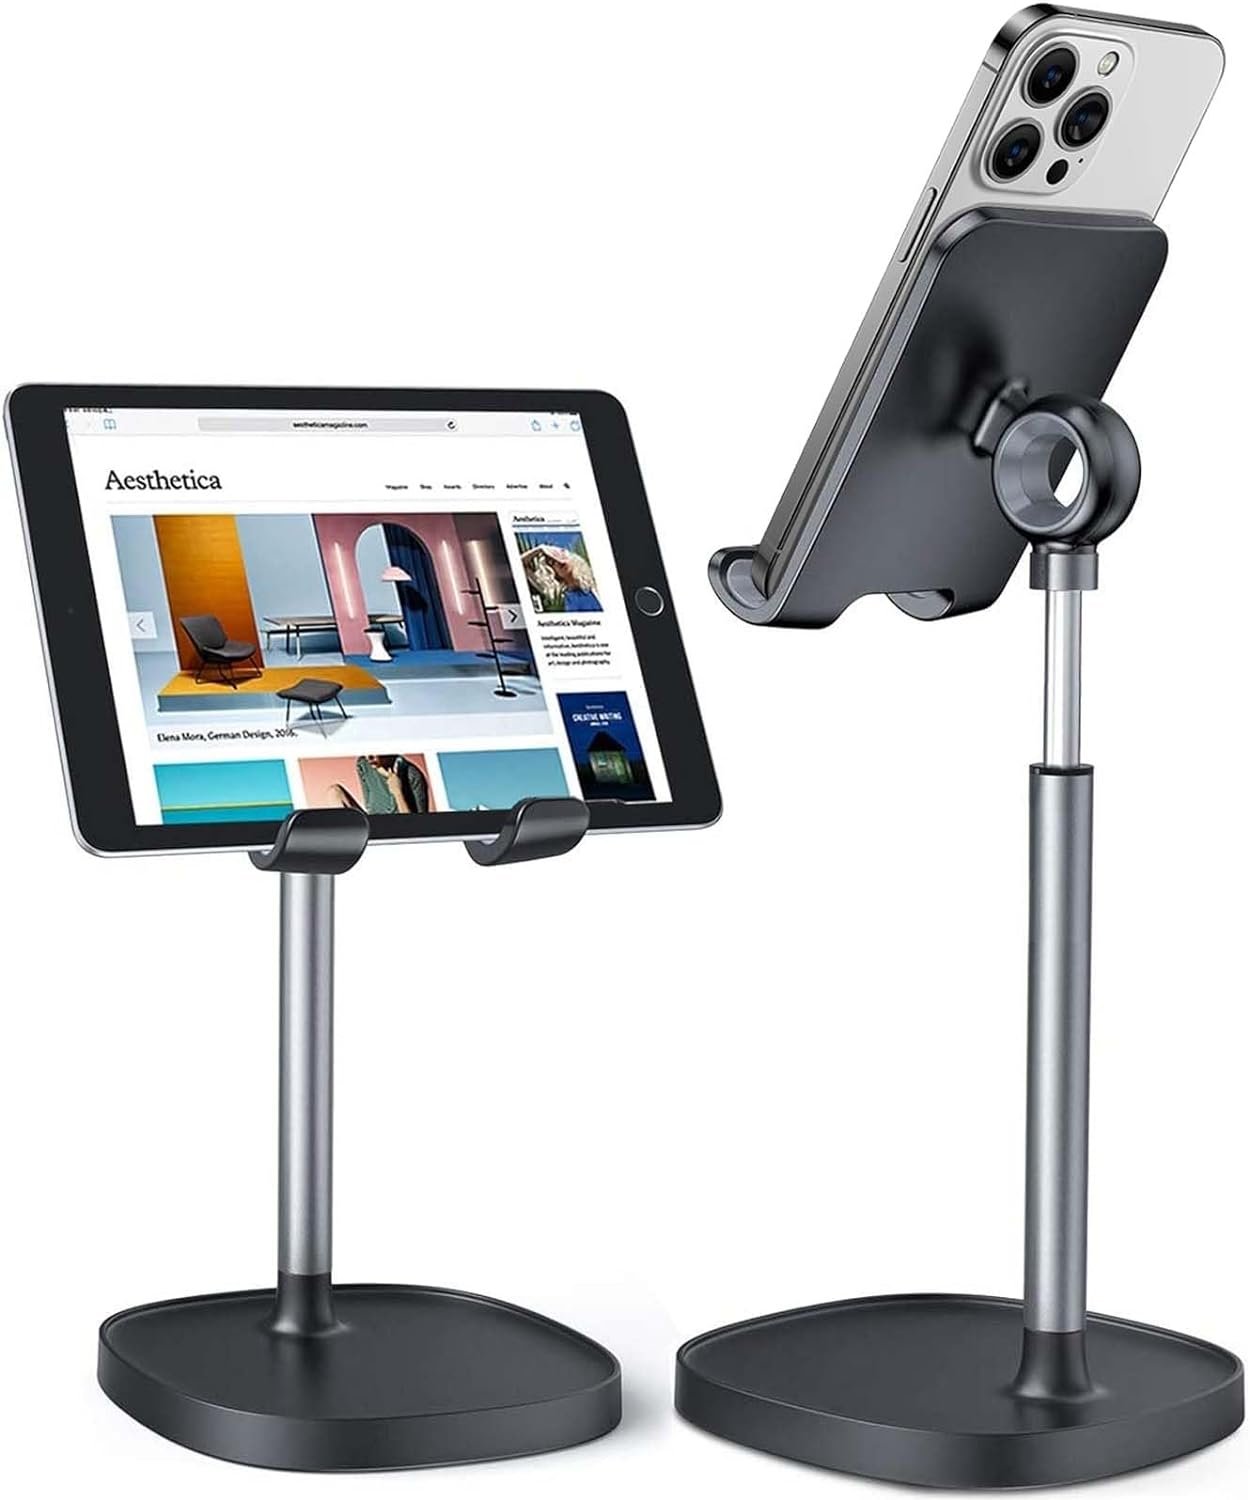 LISEN Cell Phone Stand: The Perfect Height and Angle Adjustable Phone Holder for Your Desk